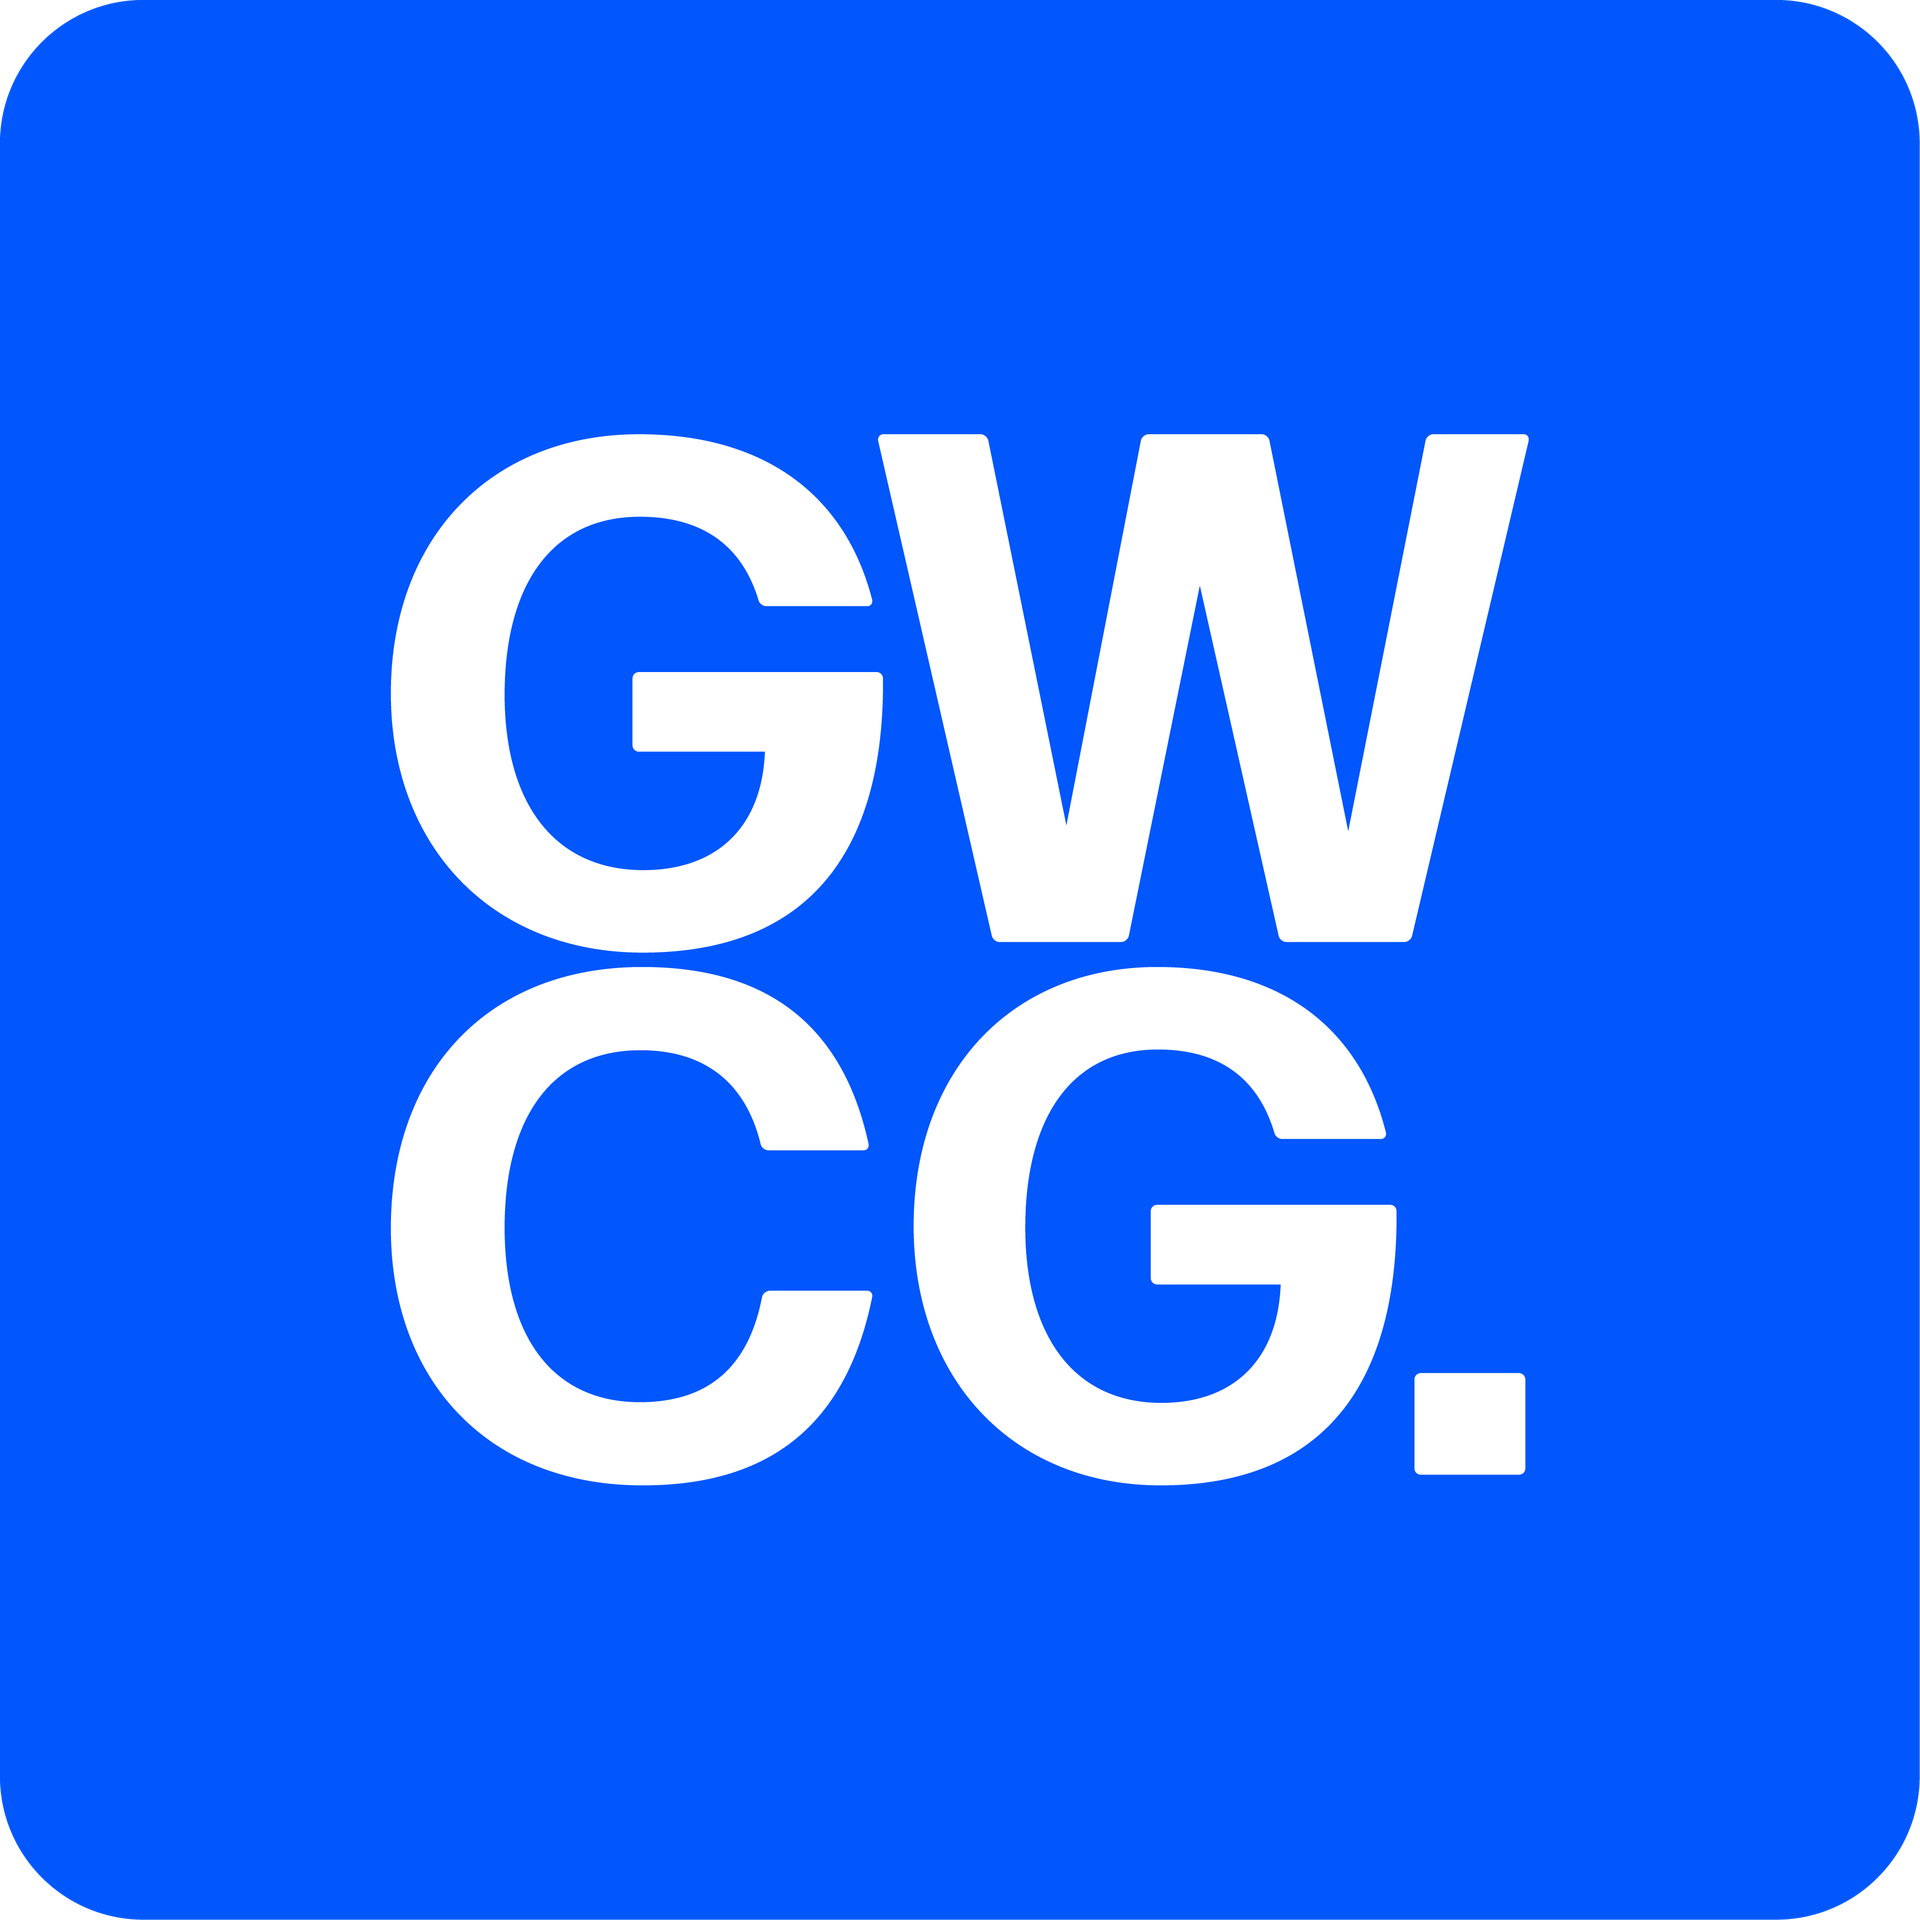 GW DIGITAL CONSULTING GROUP